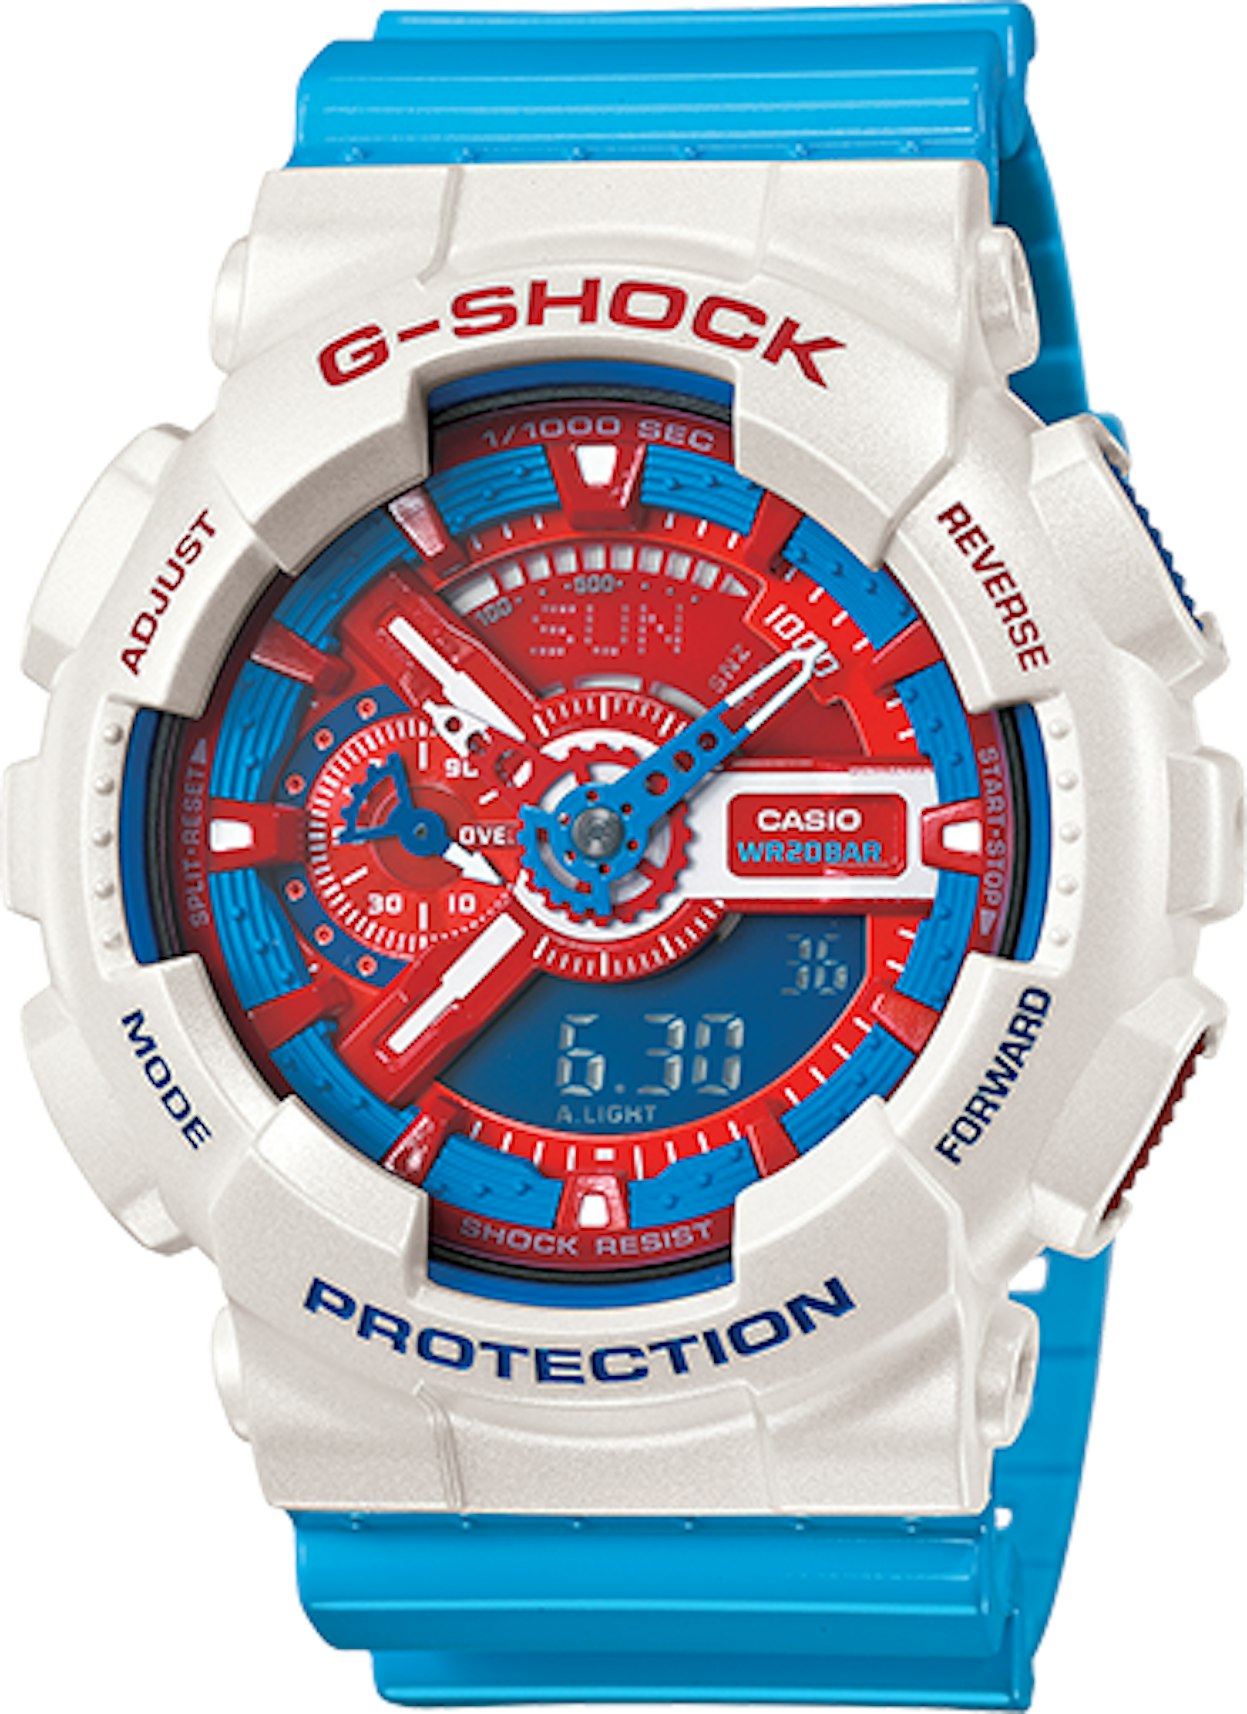 Casio G-Shock Limited Edition Red and Blue Series GA-110AC-7ADR - 55mm Resin - US